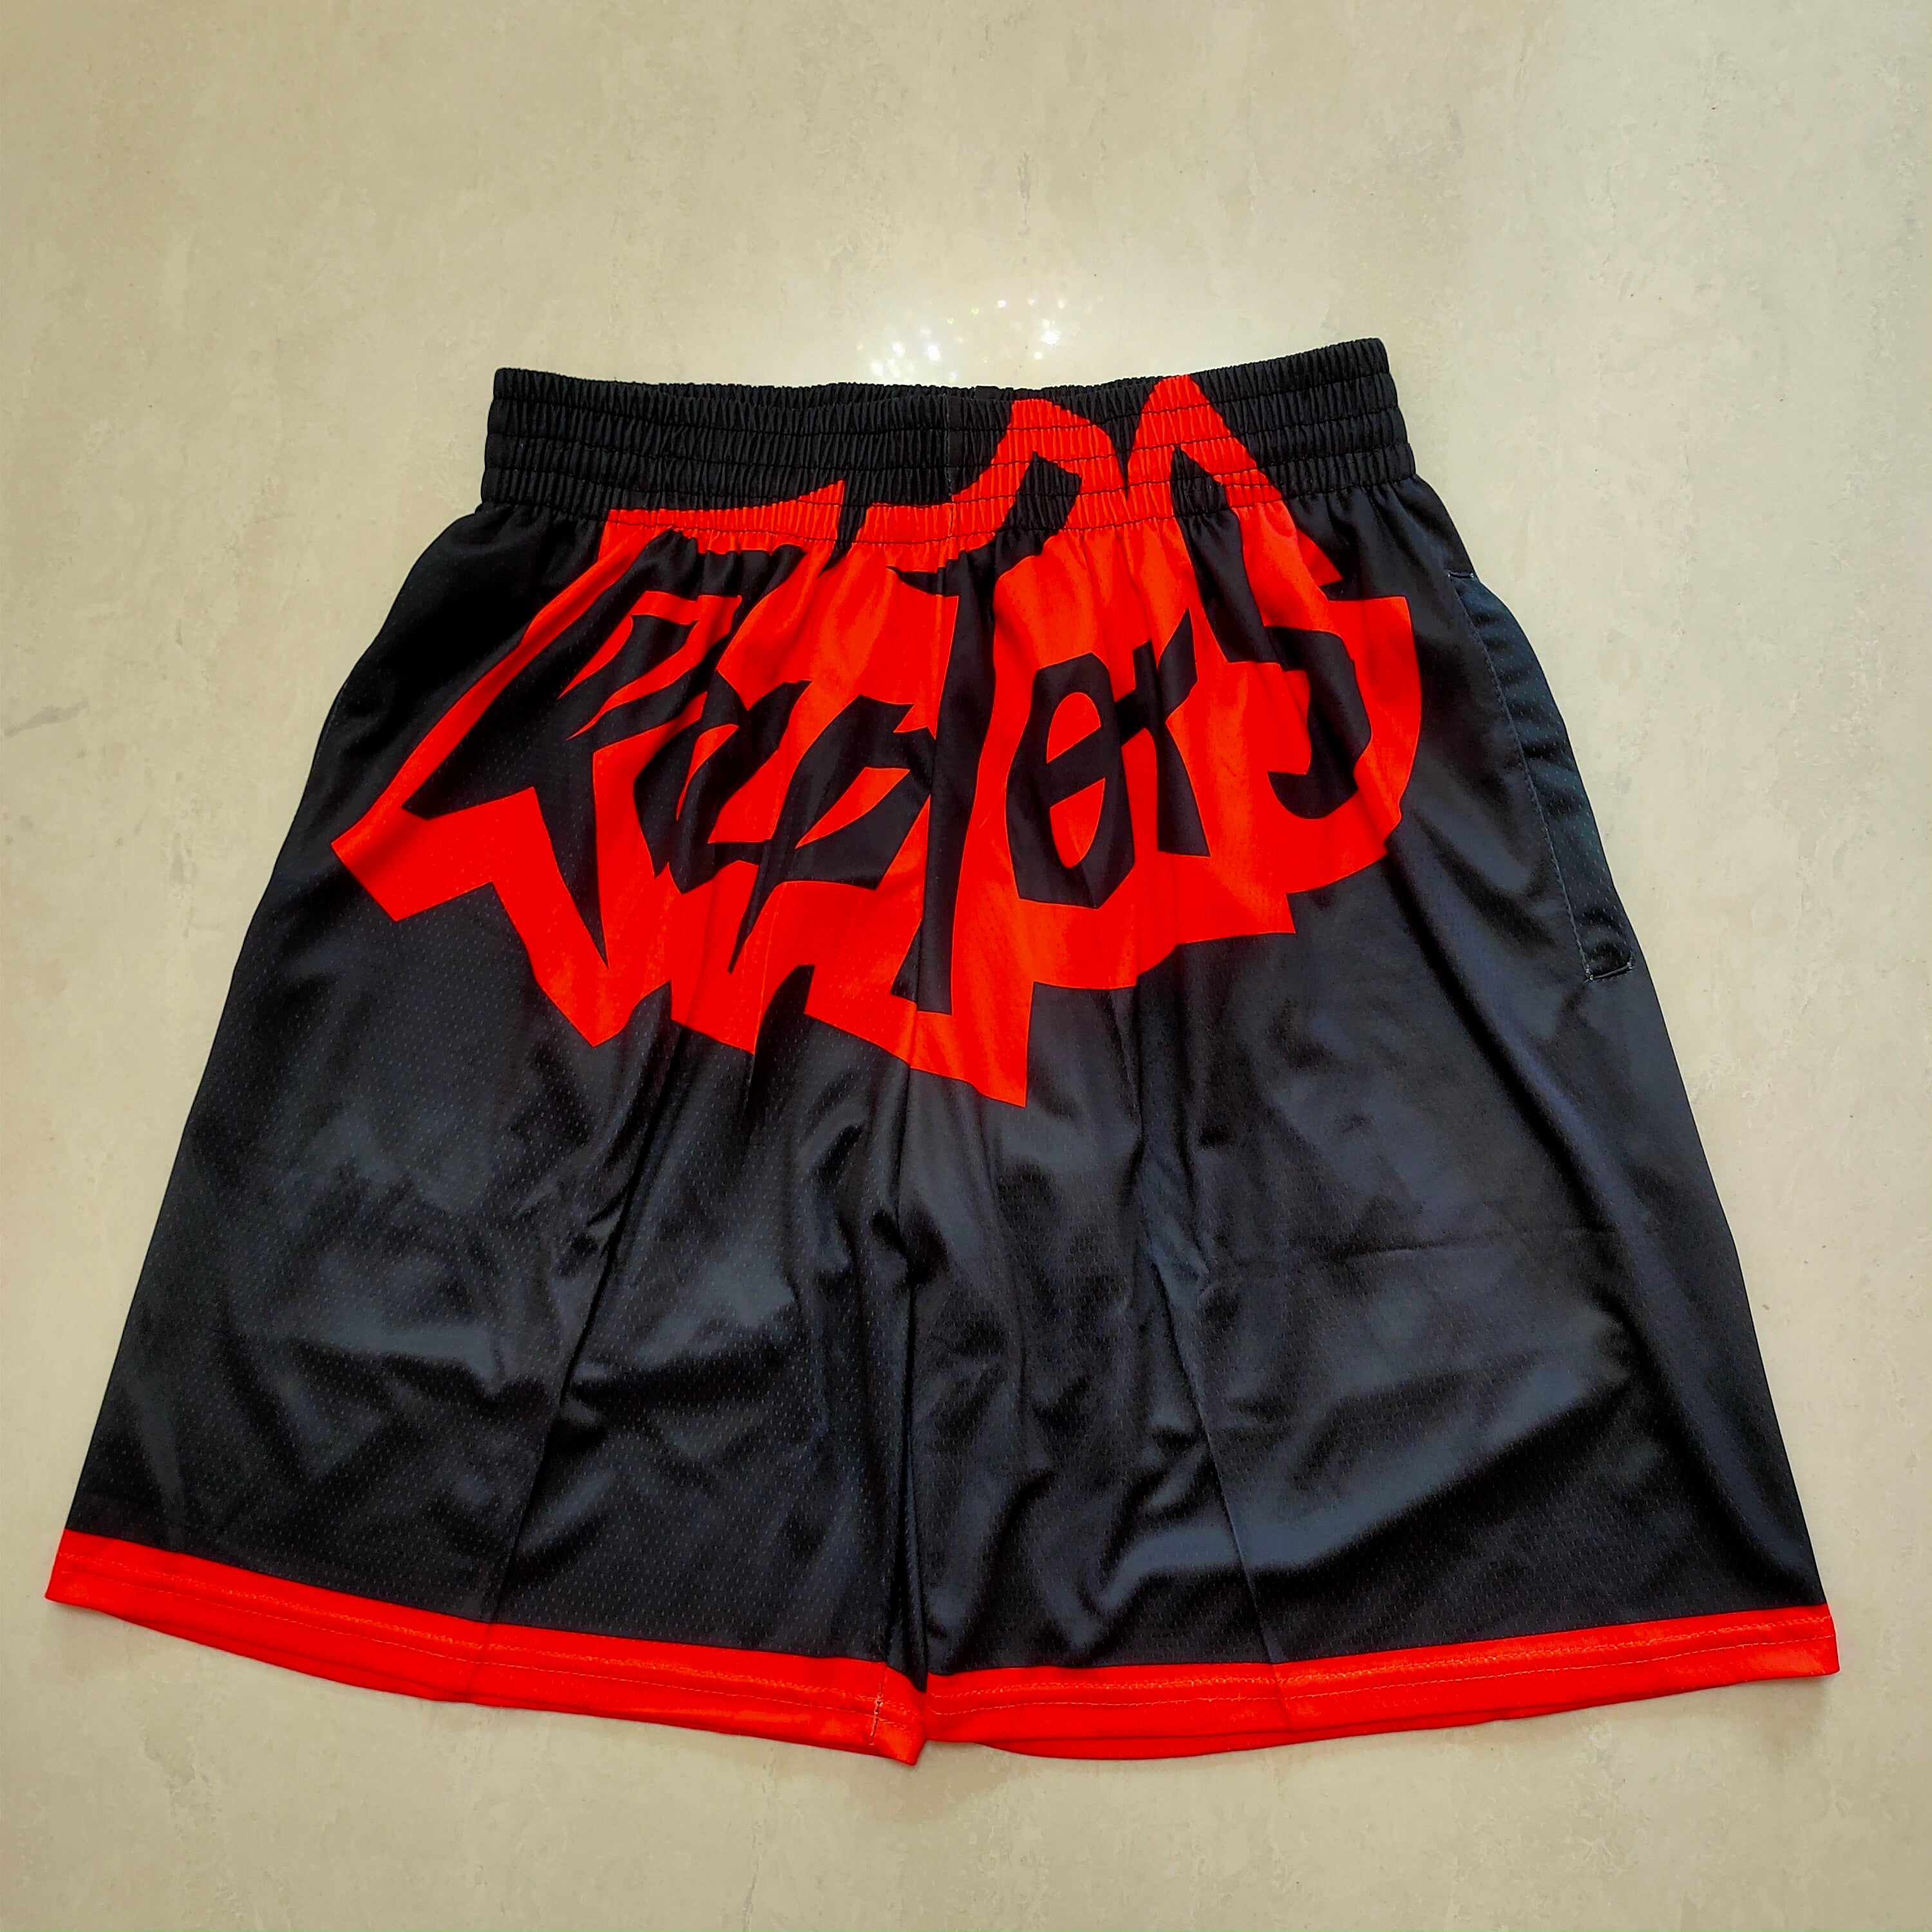 Raptors red and black shorts